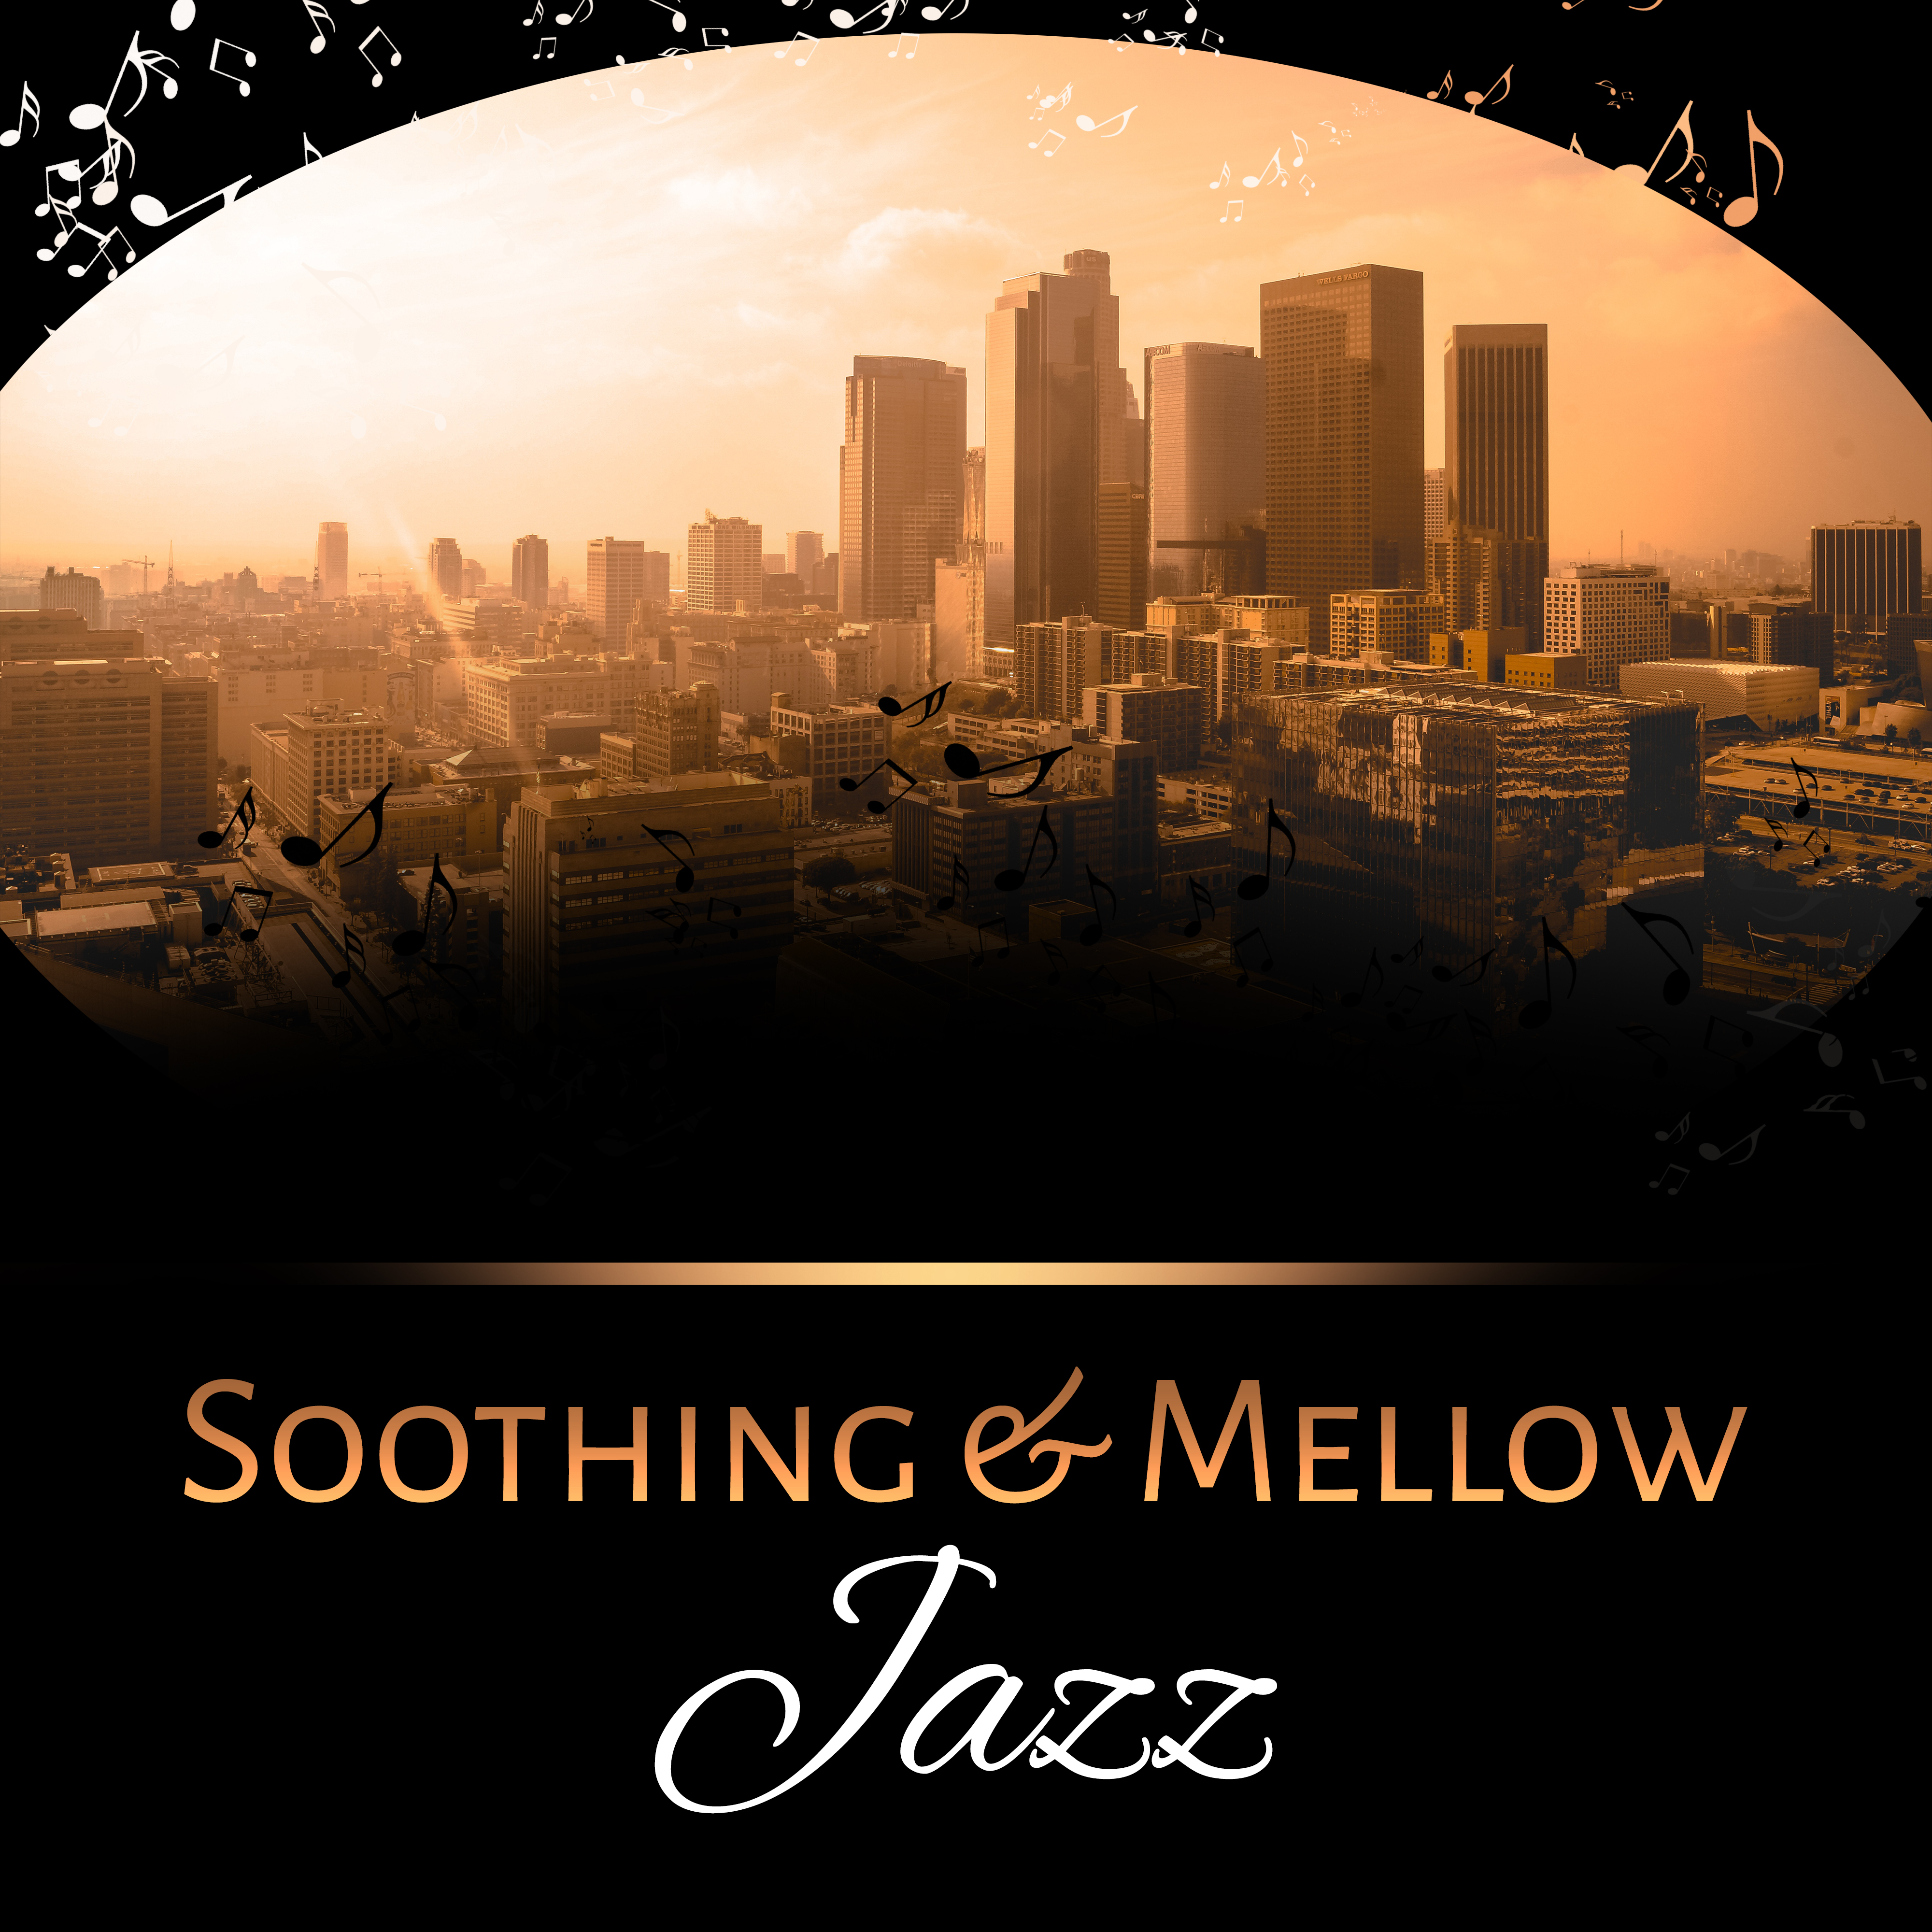 Soothing  Mellow Jazz  Stress Relief, Relax with Jazz Sounds, Music to Calm Down, Shades of Jazz